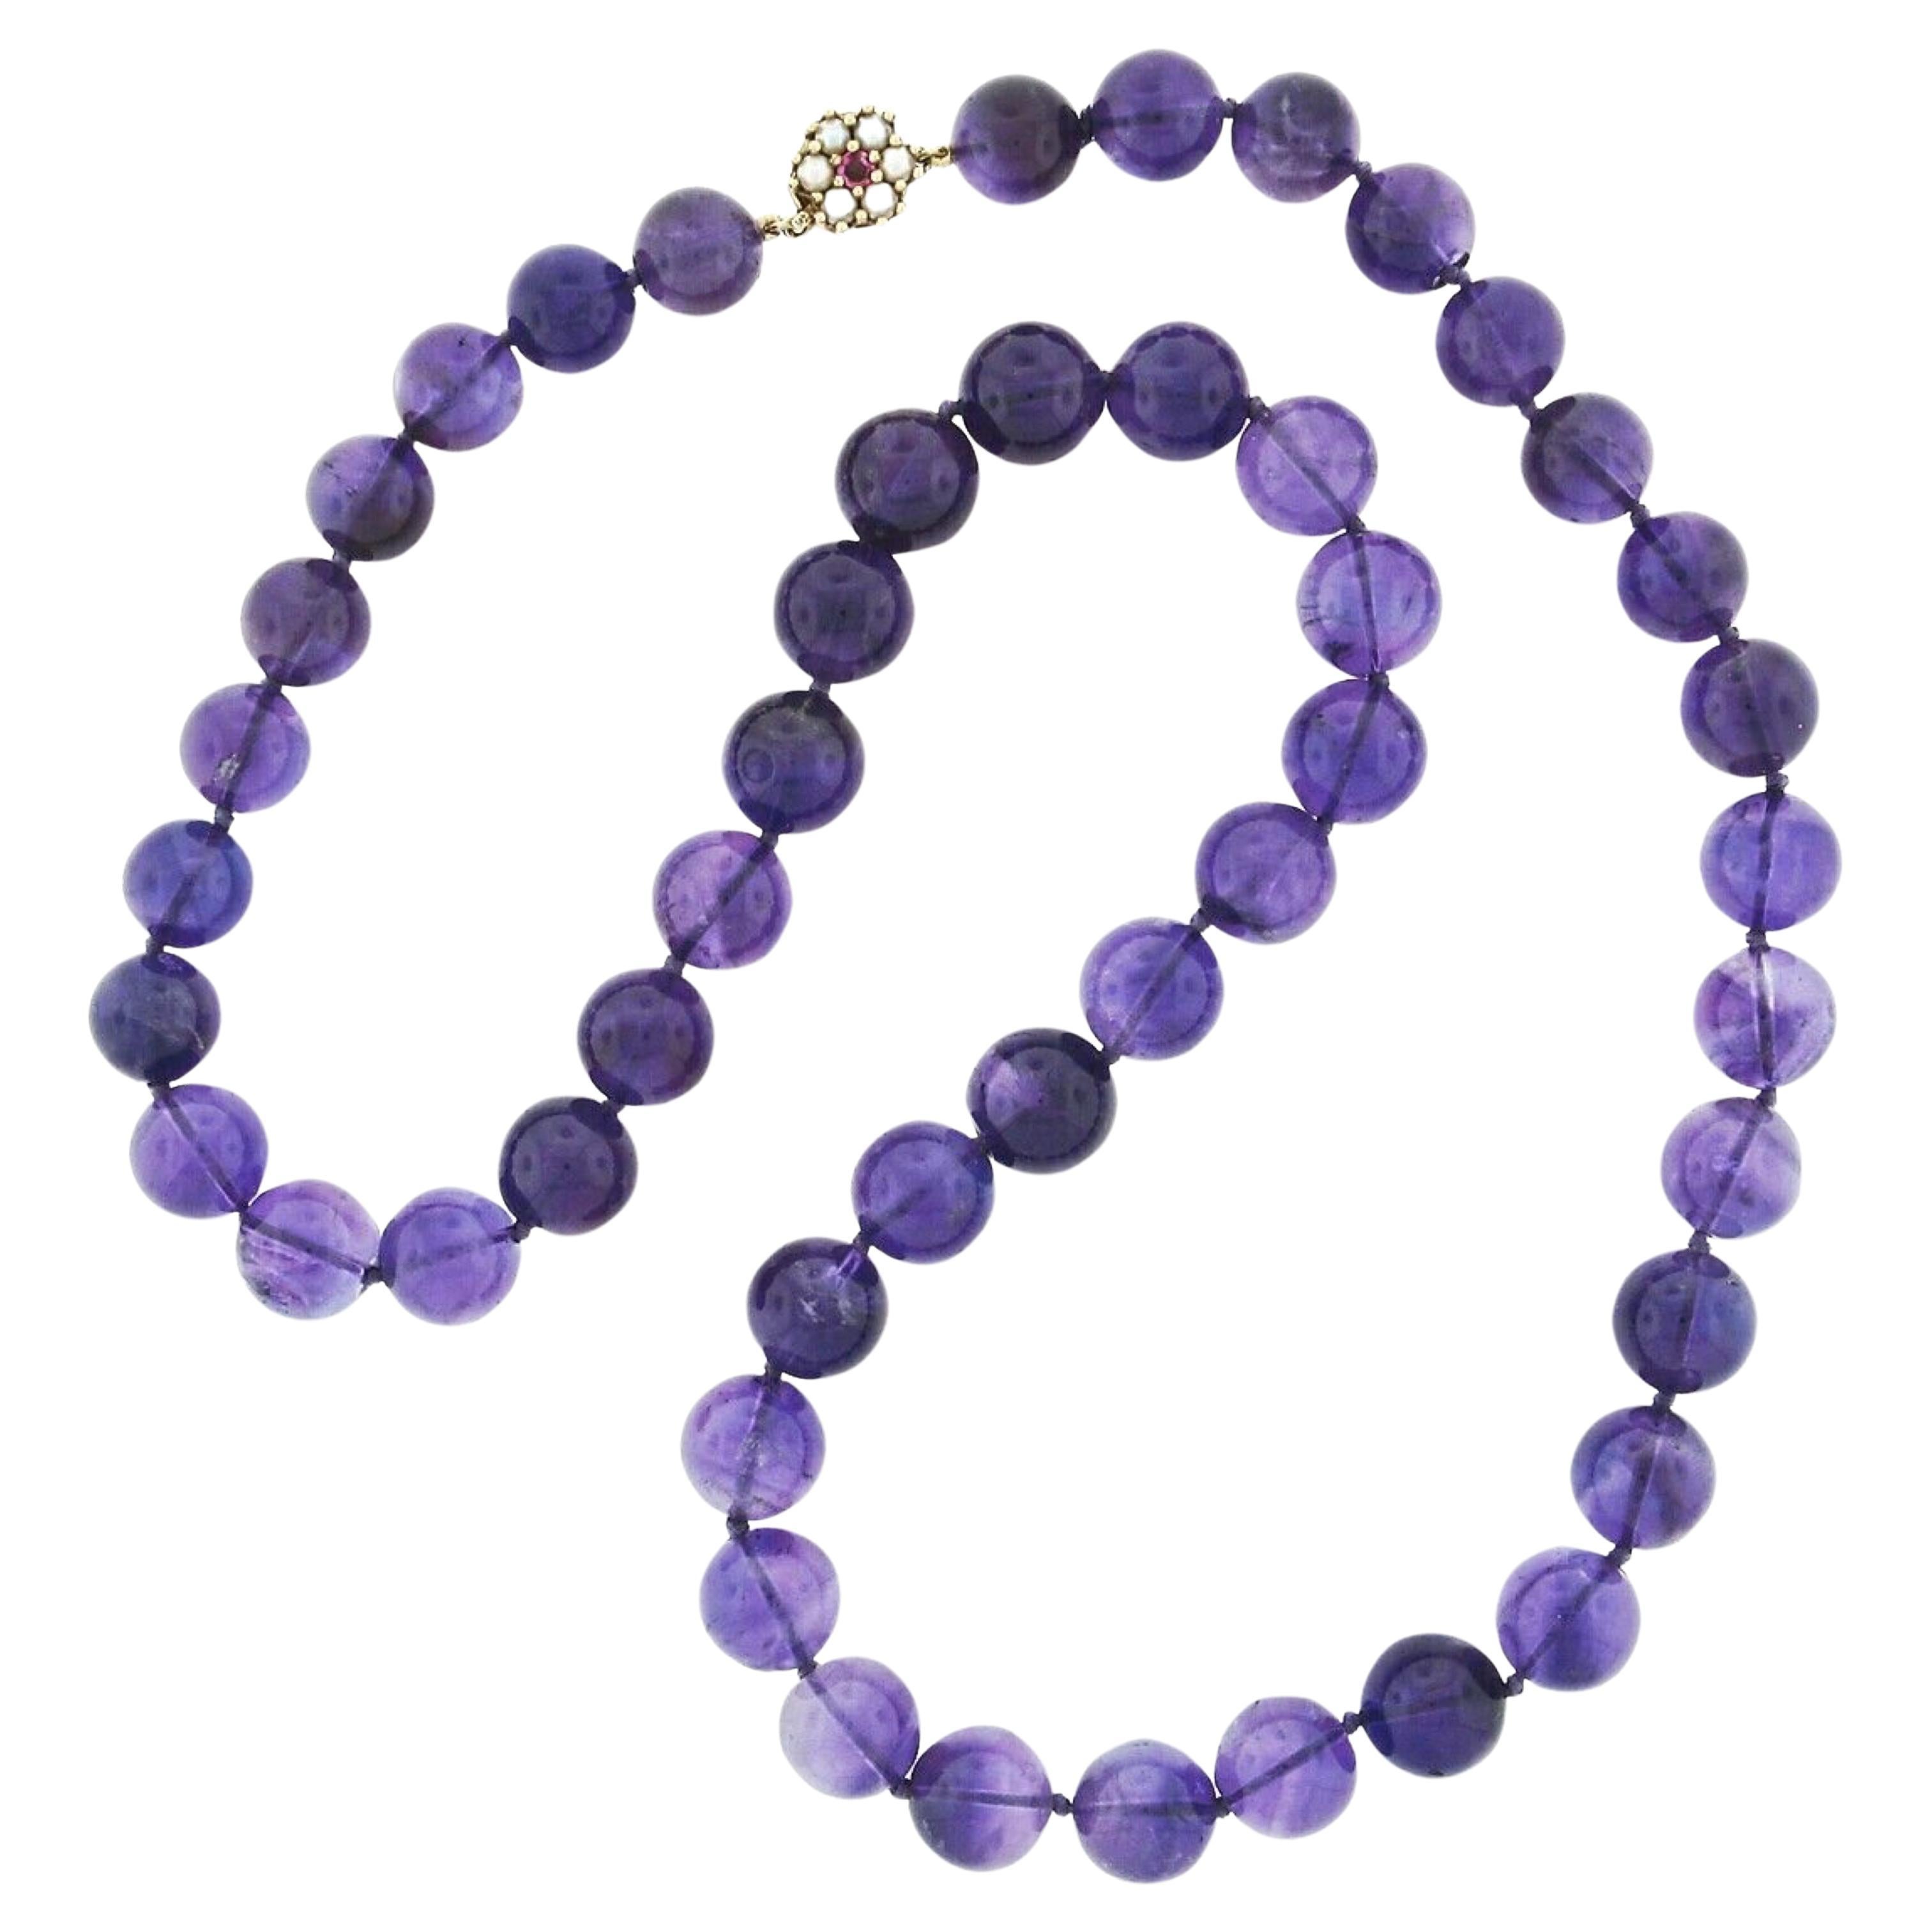 505ctw Round Bead Amethyst Strand Necklace W/ 14k Gold Pearl Ruby Clasp